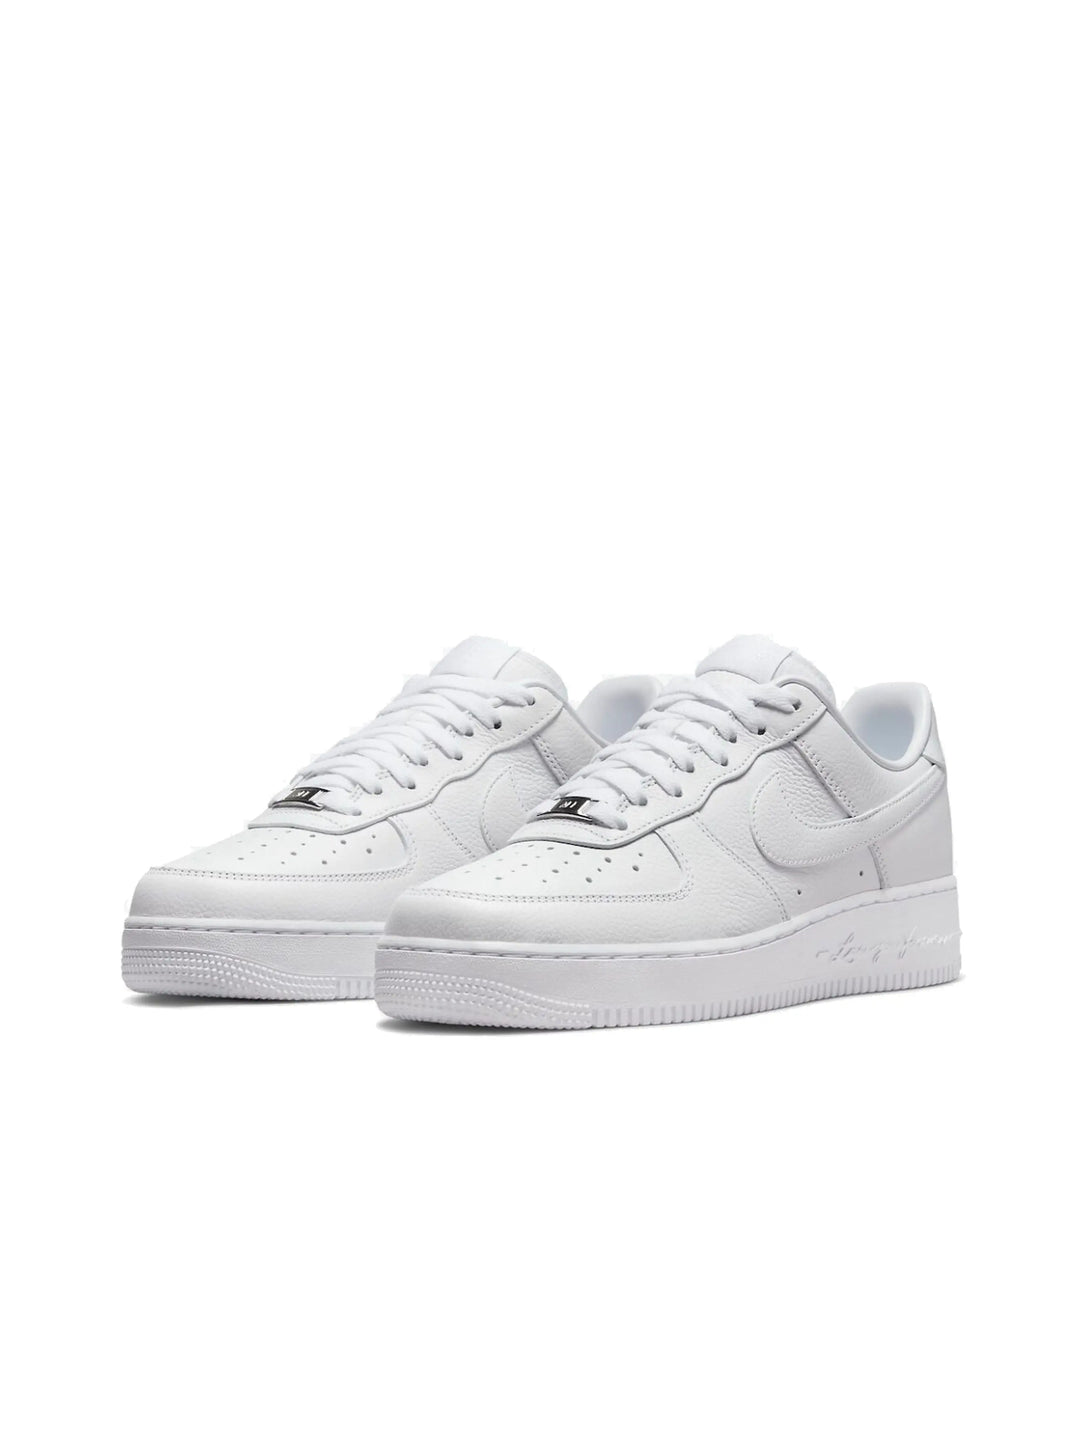 Nike Air Force 1 Low Drake NOCTA Certified Lover Boy in Auckland, New Zealand - Shop name